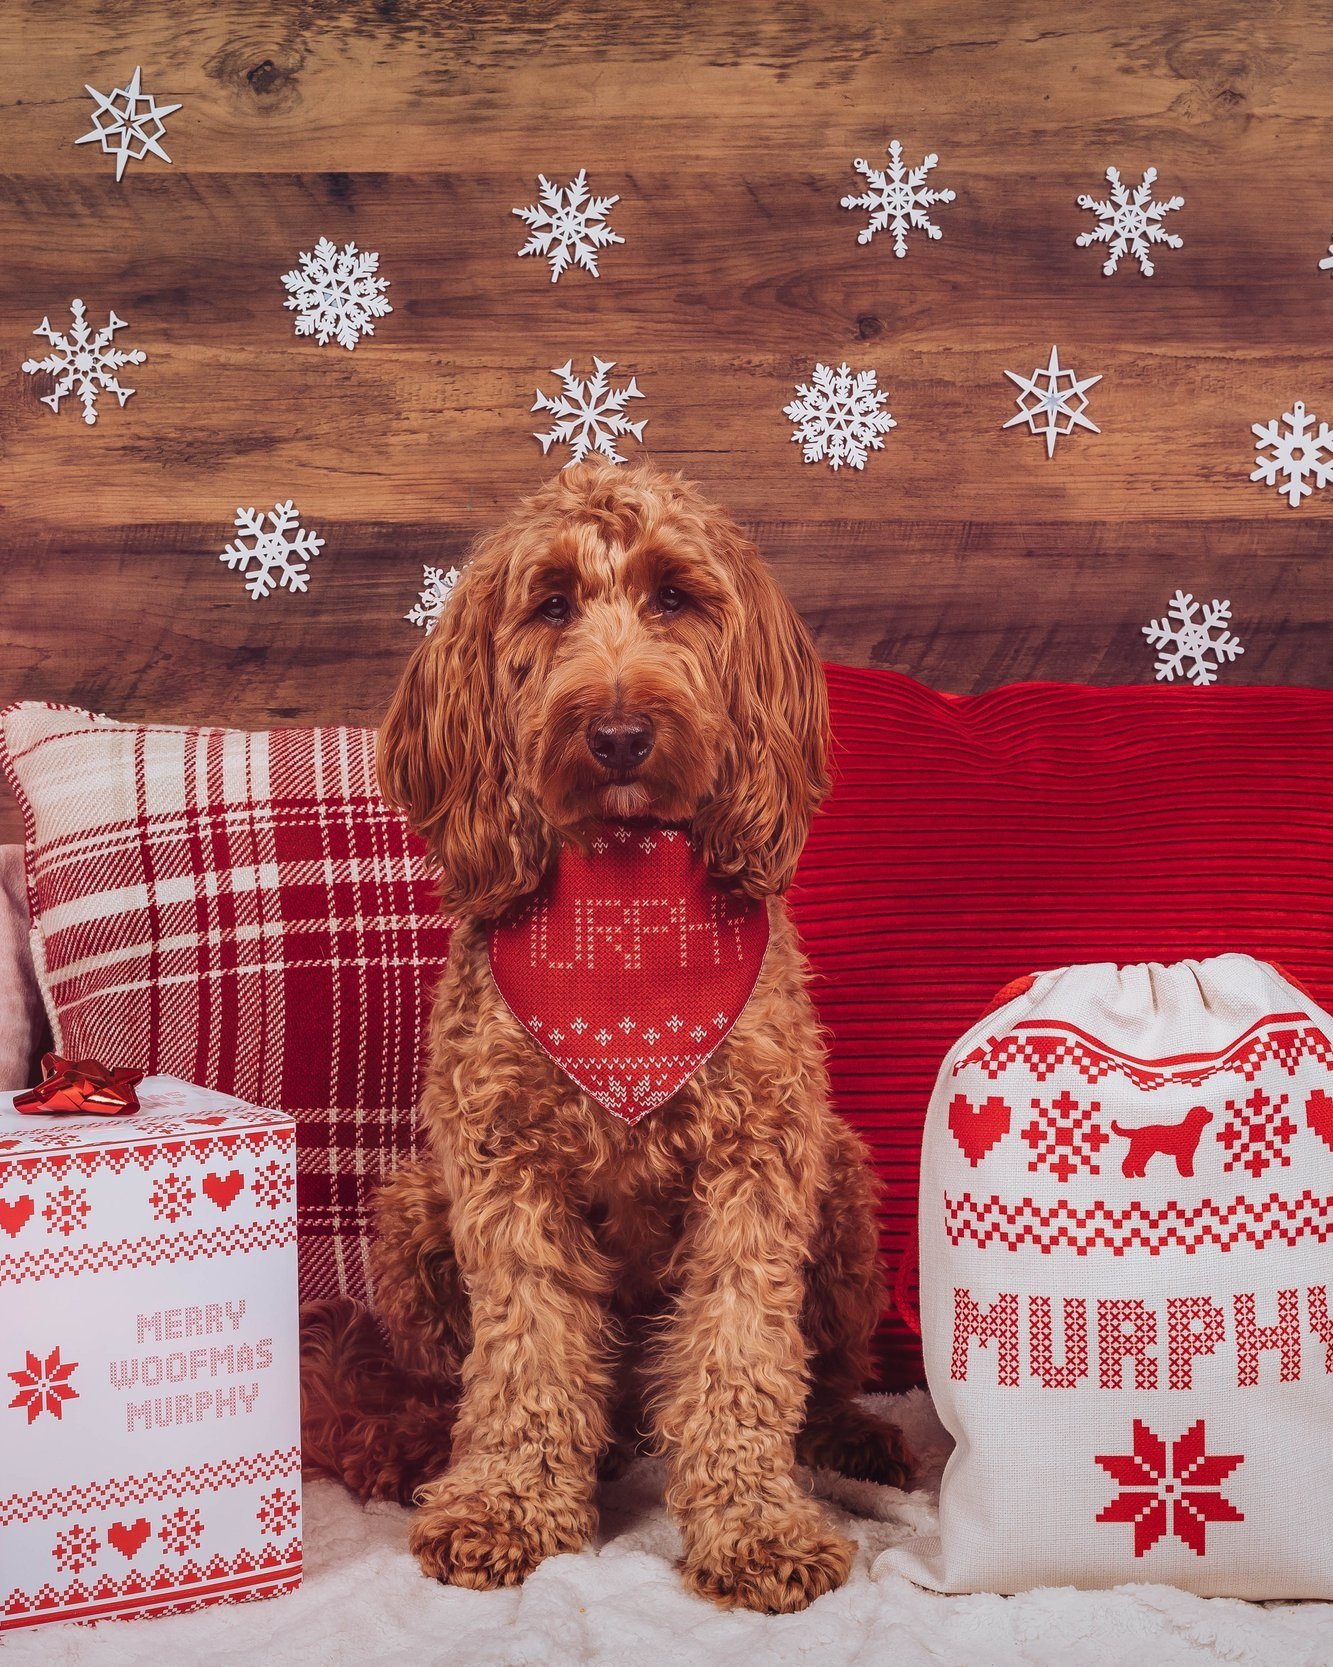 The Most Pupular Holiday Dog Names In The U.S. Revealed